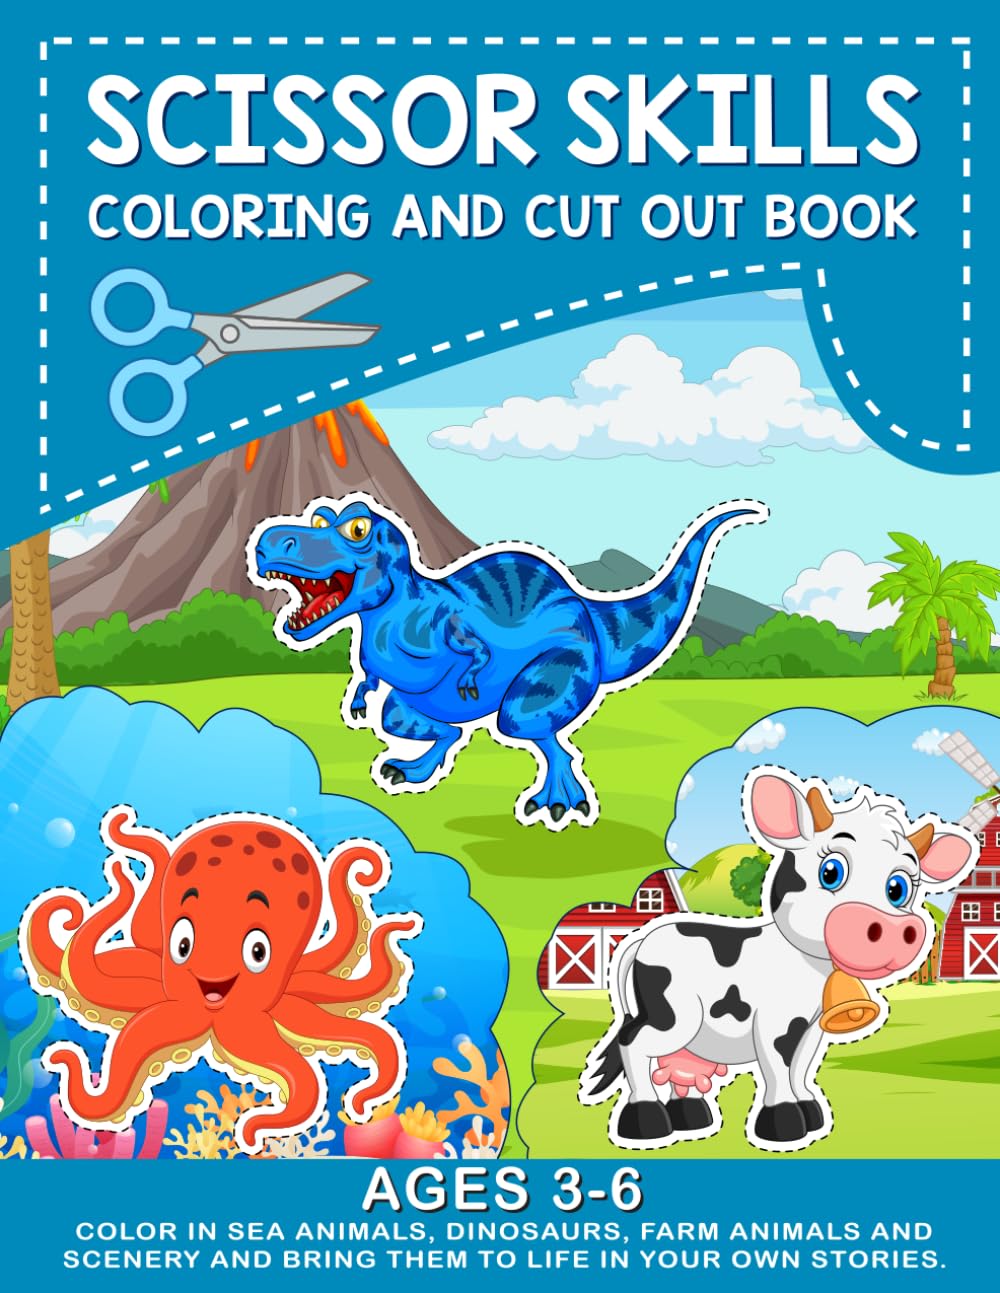 Scissor Skills, Cut Out & Activity Book: Color and cut out sea animals, dinosaurs and farm animals, including scenery! Improve cutting skills, and create stories. So creative!